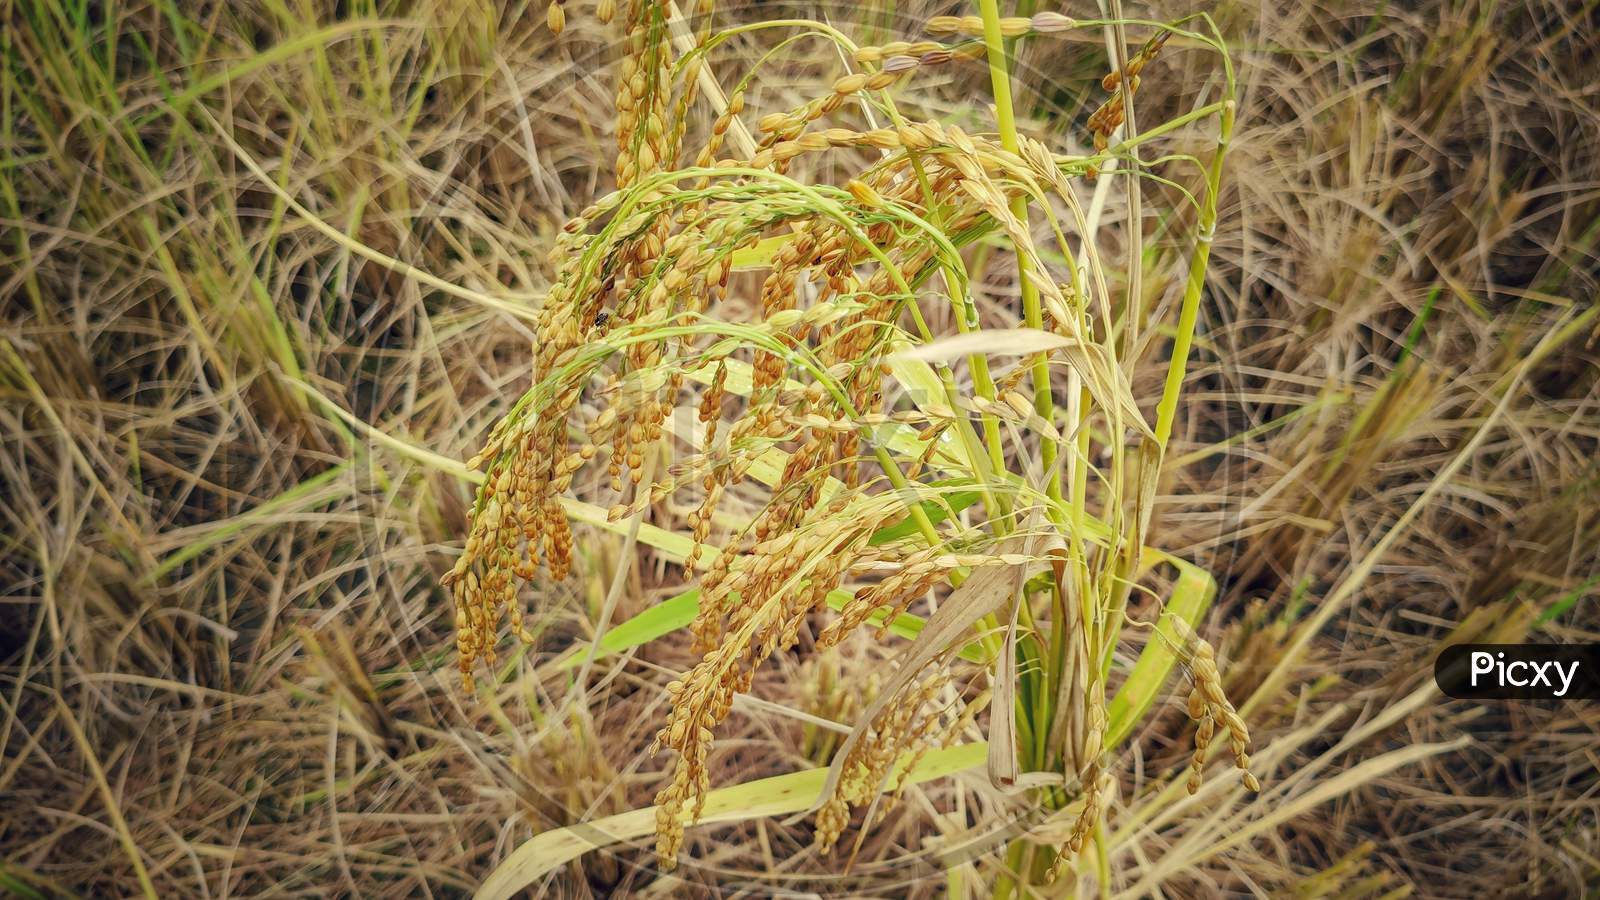 Bunch of mature paddy grain ready to be harvested in vintage background.